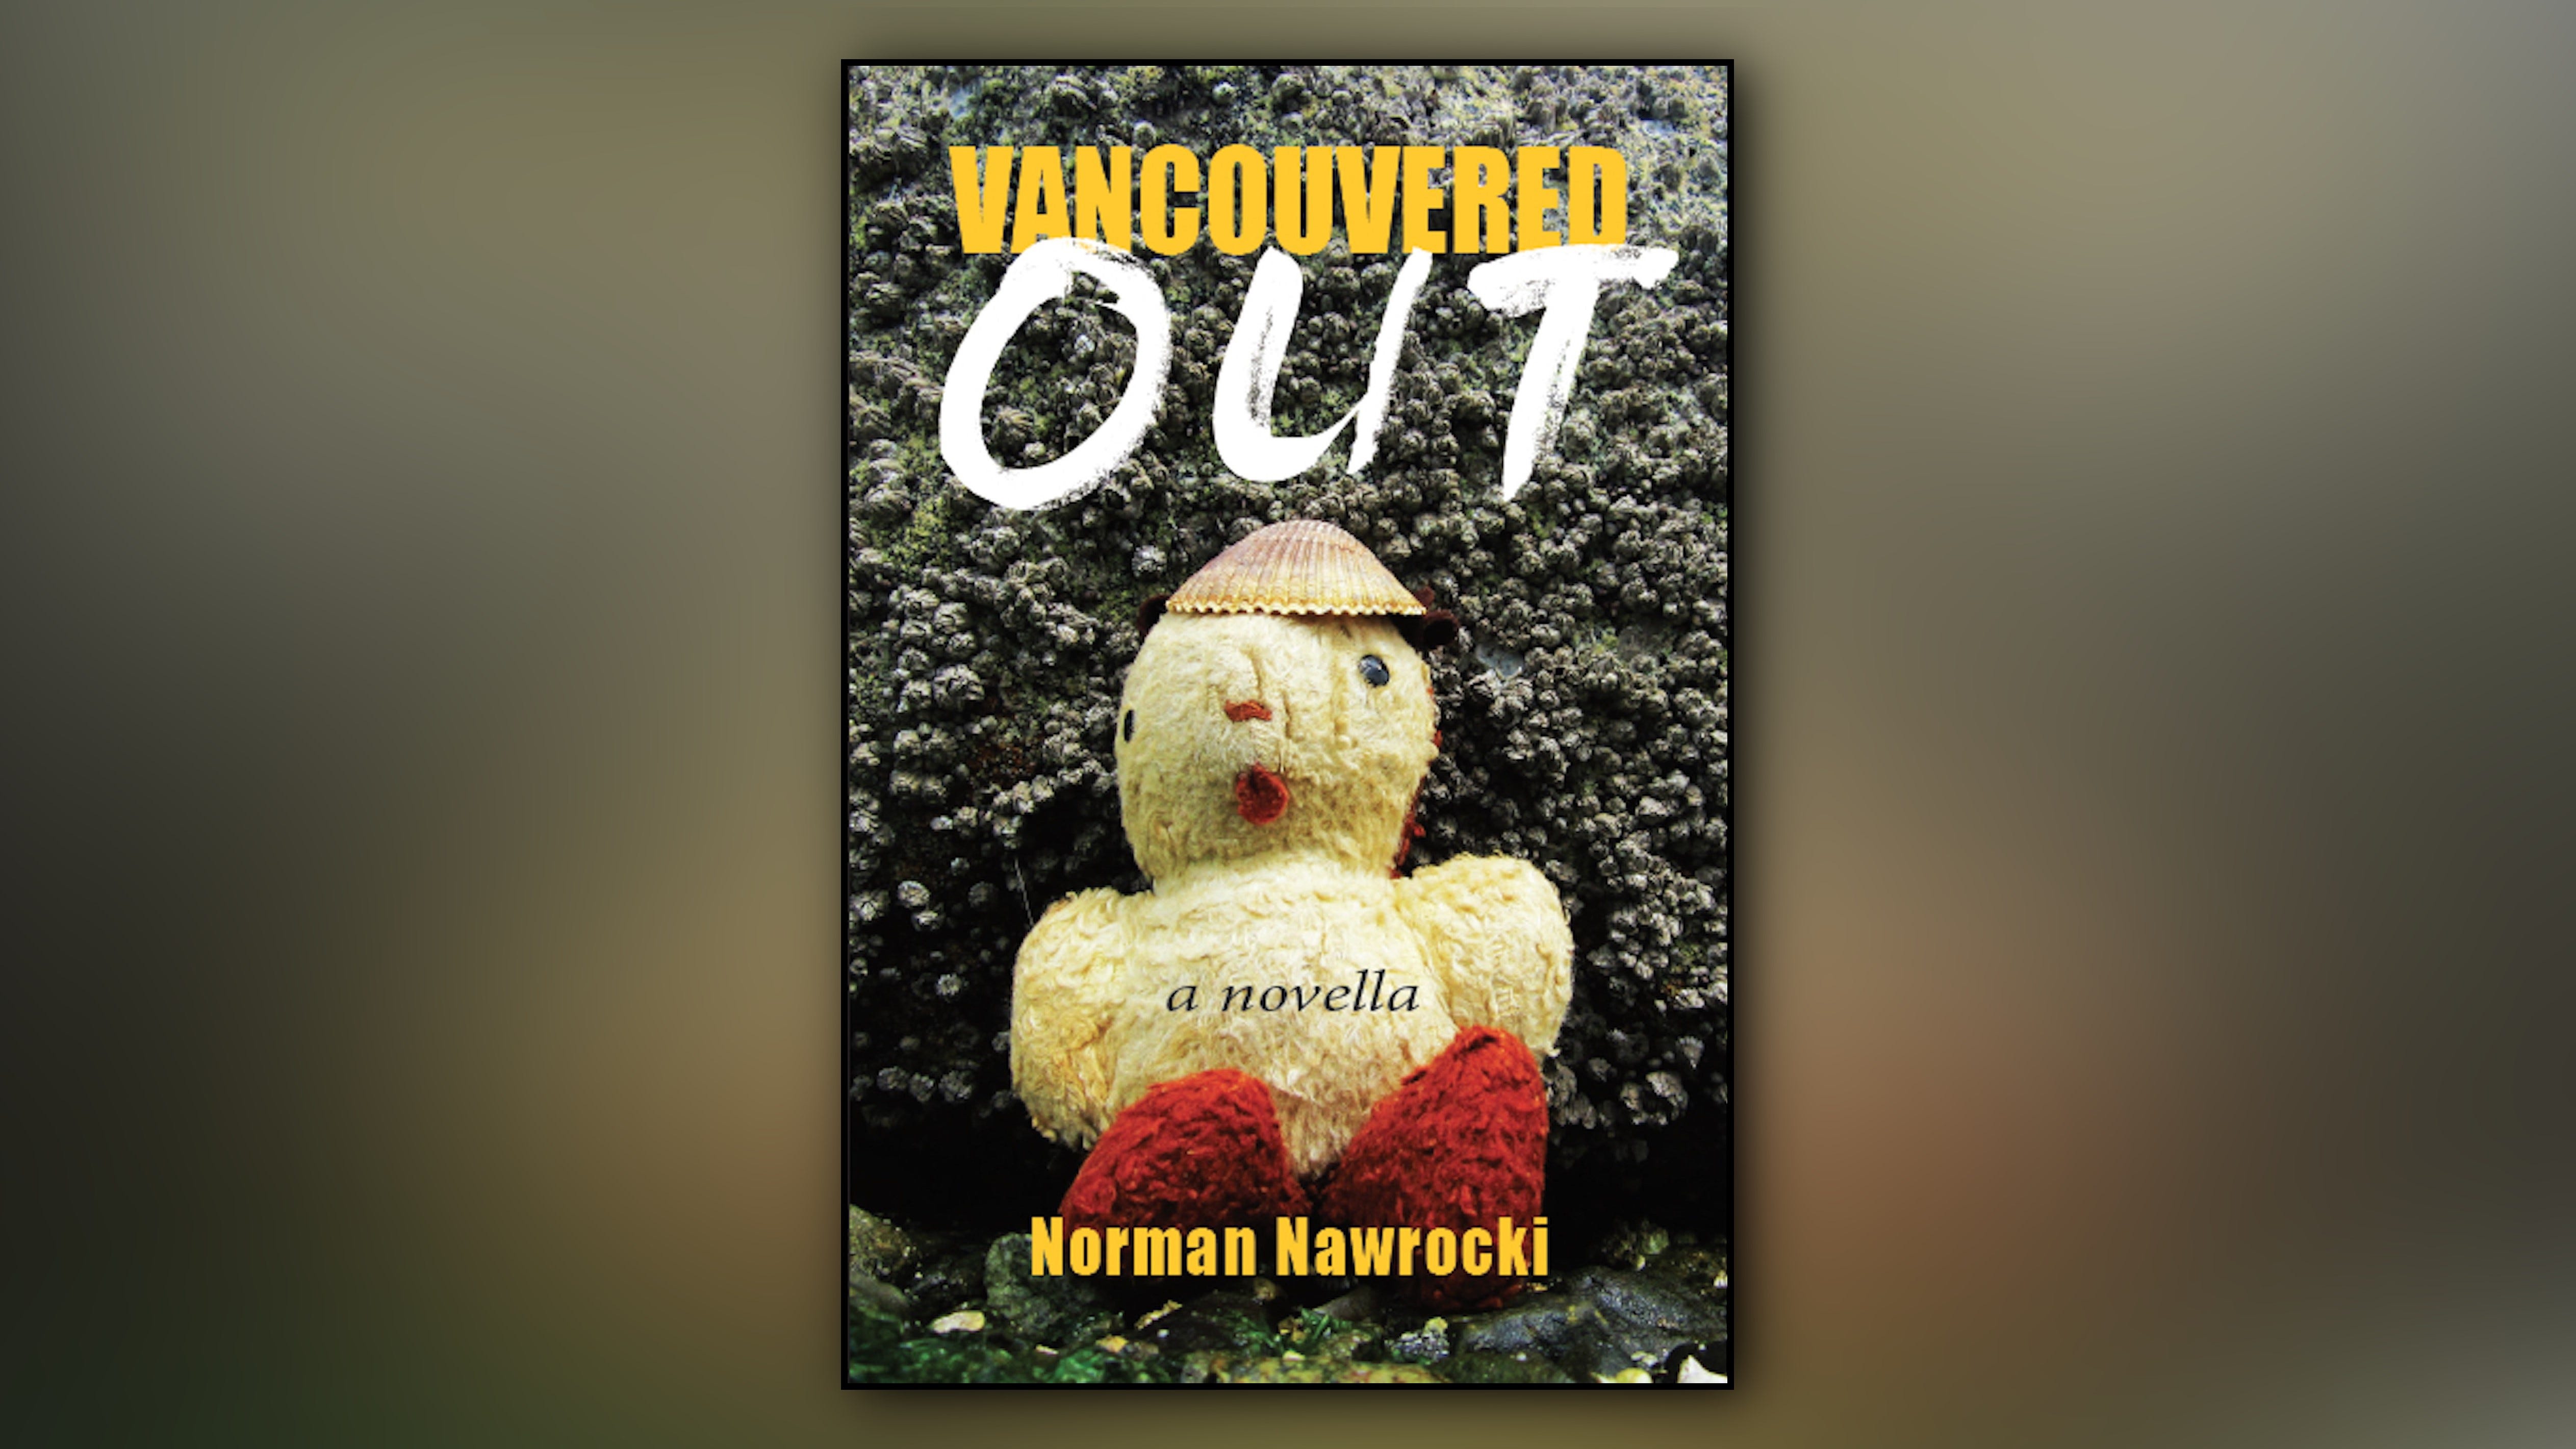 BC’s housing crisis is the backdrop for new novella by ex-Vancouverite